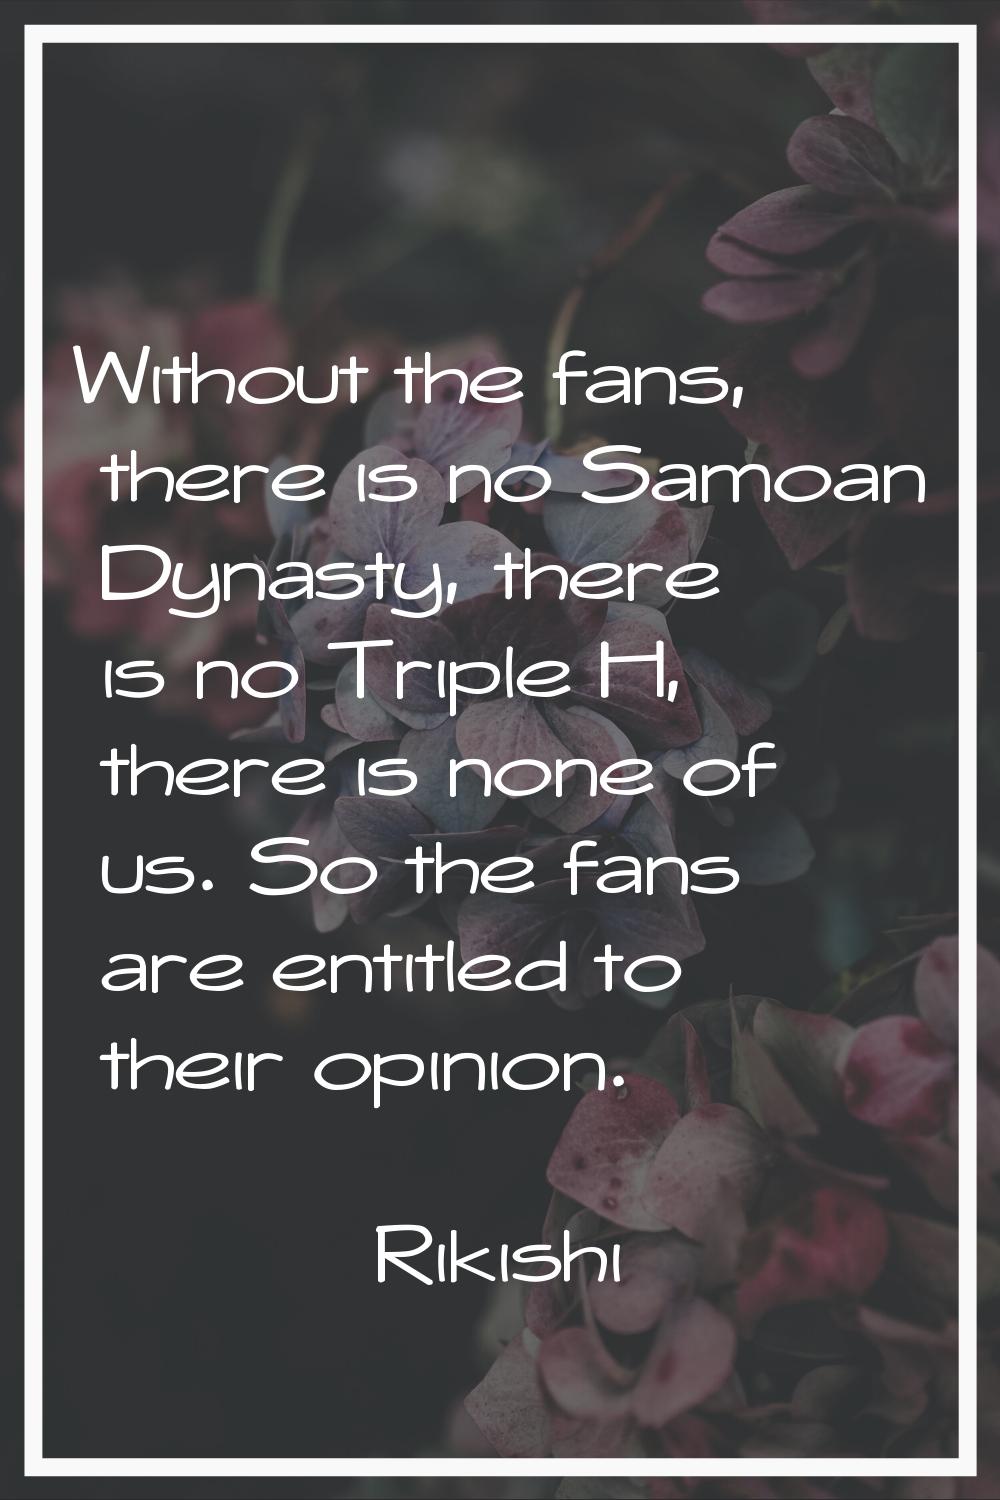 Without the fans, there is no Samoan Dynasty, there is no Triple H, there is none of us. So the fan